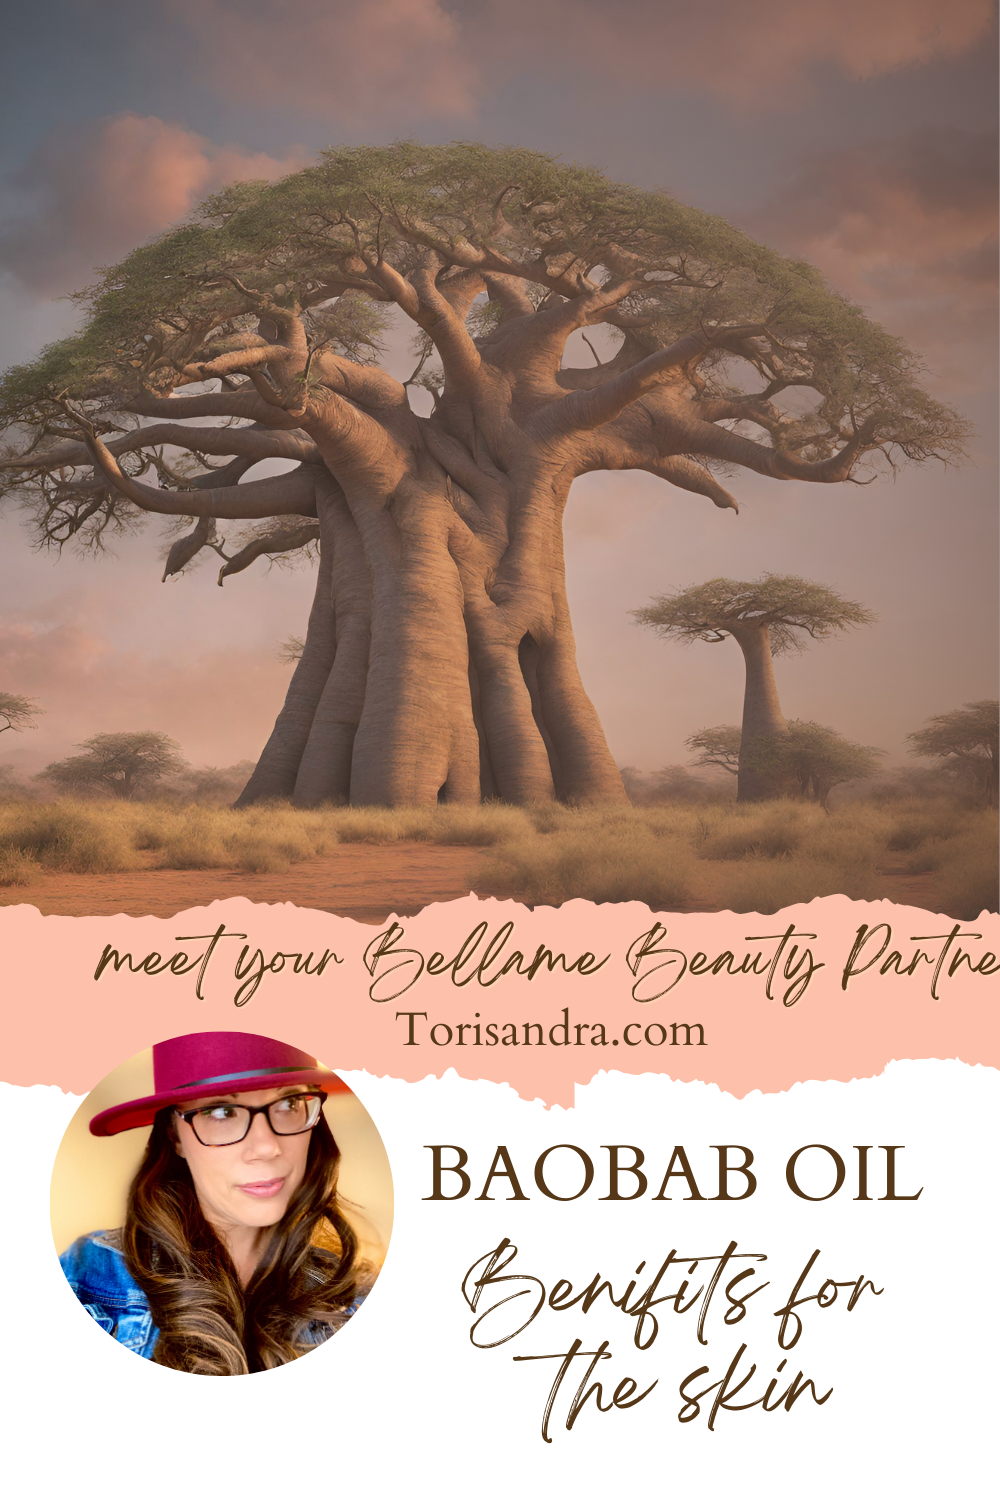 baobab natural benefits from the tree and the oils from the nature of the tree